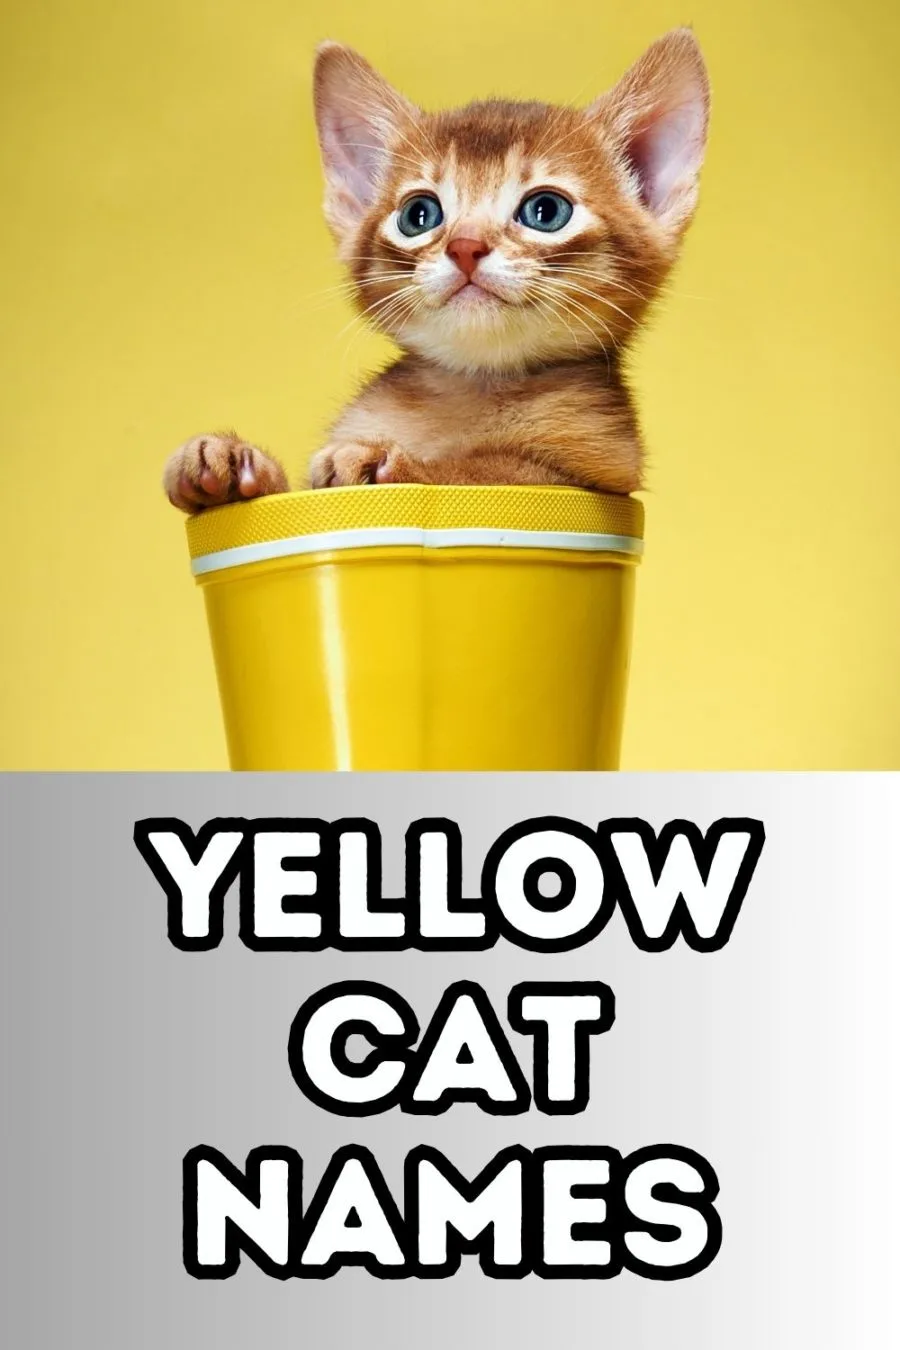 yellow kitten sitting in yellow cup in top half of image with "yellow cat names" in lower half of image